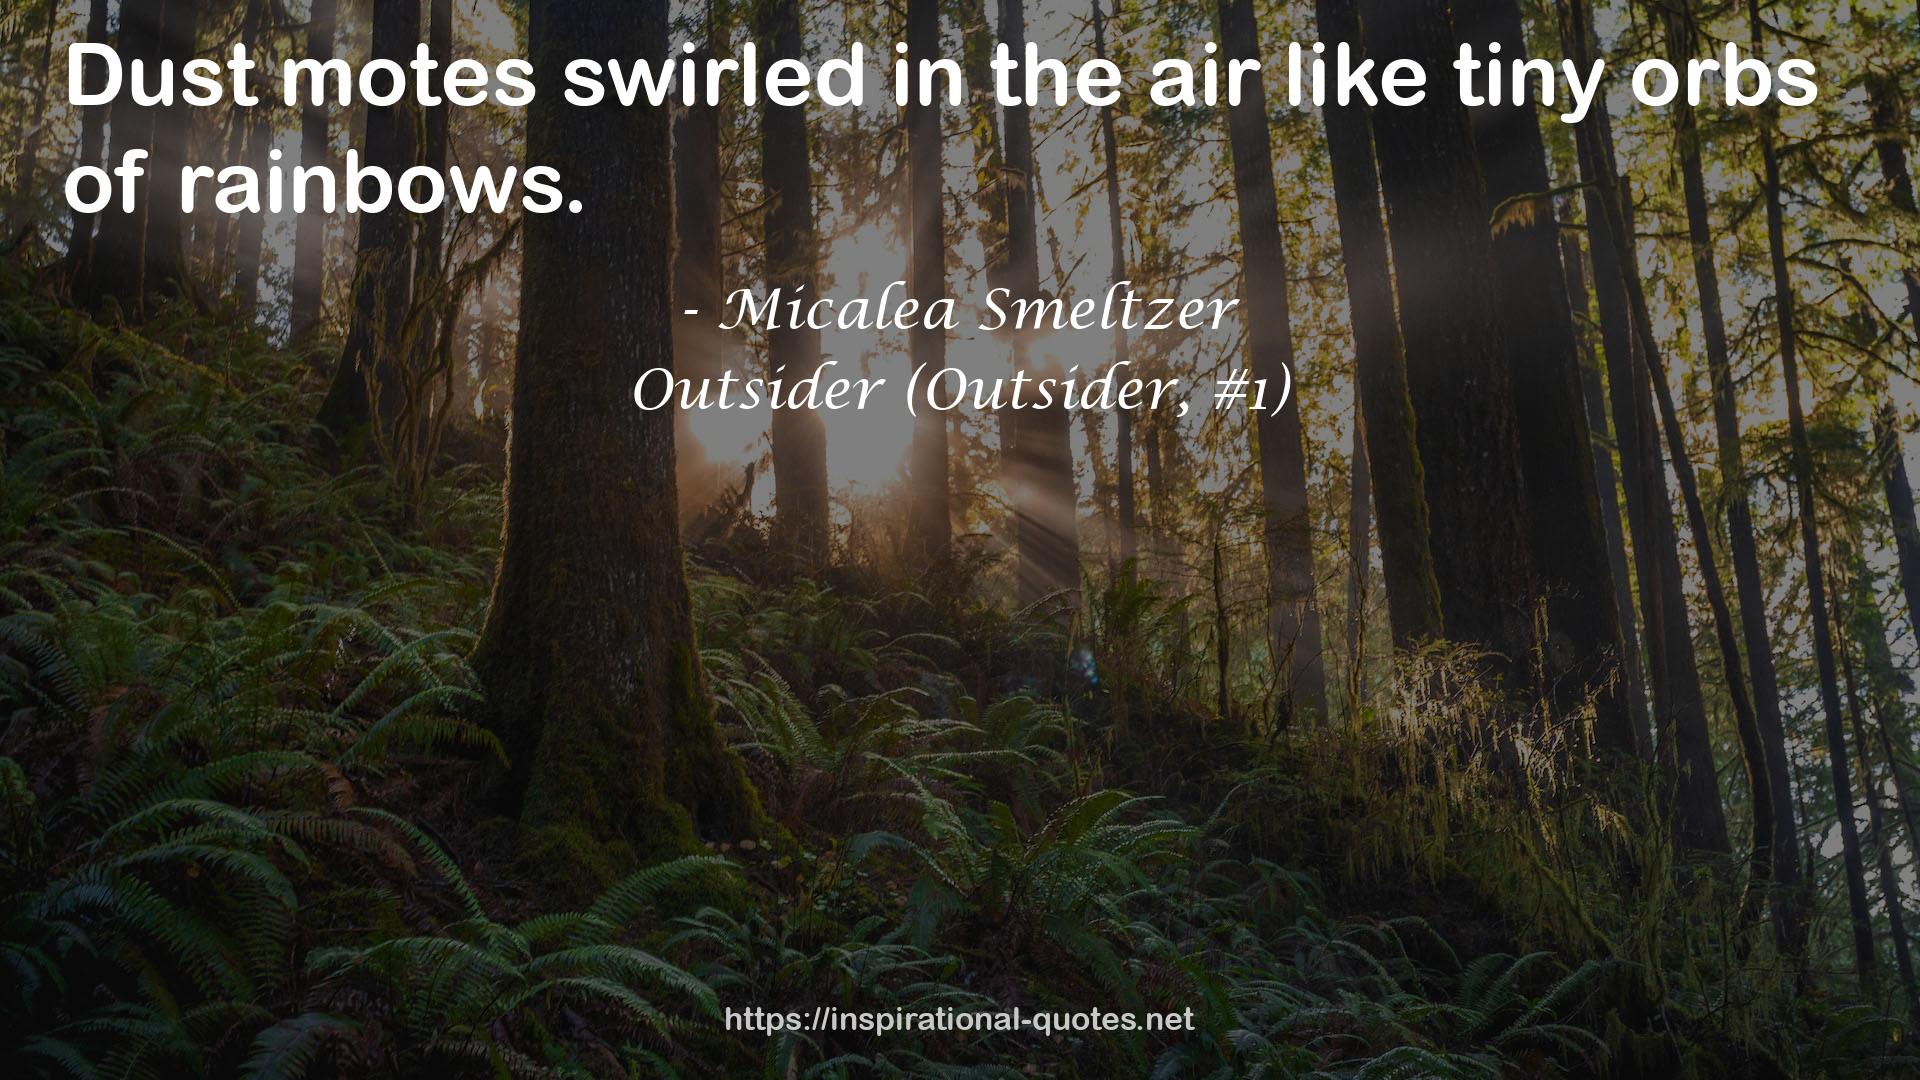 Outsider (Outsider, #1) QUOTES